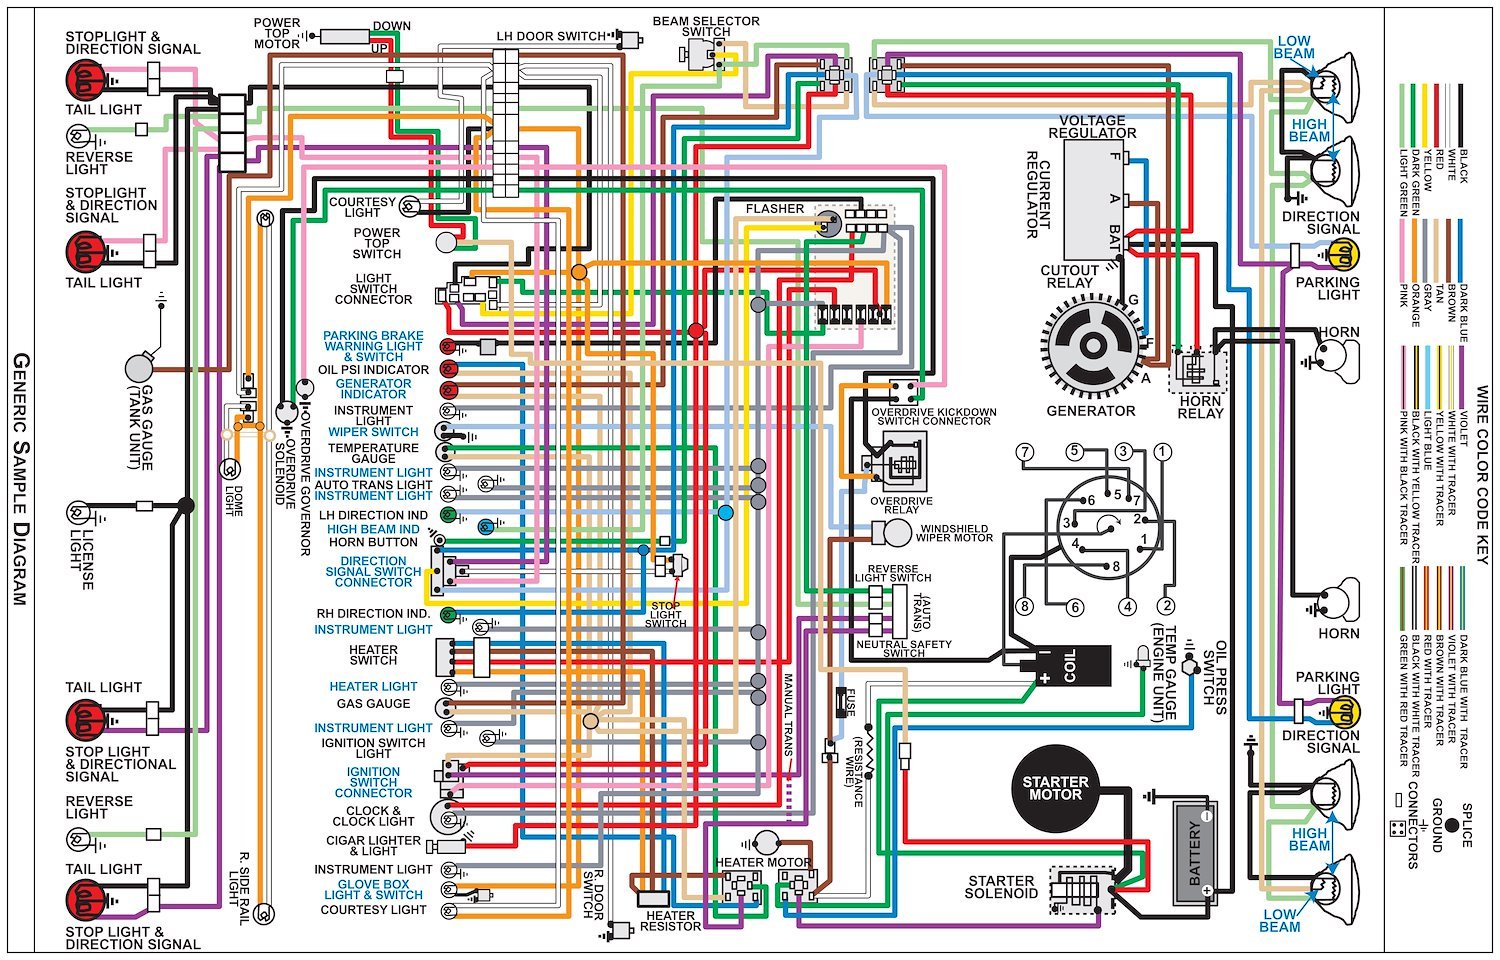 Wiring Diagram for 1949 Plymouth Car, 11 in x 17 in., Laminated